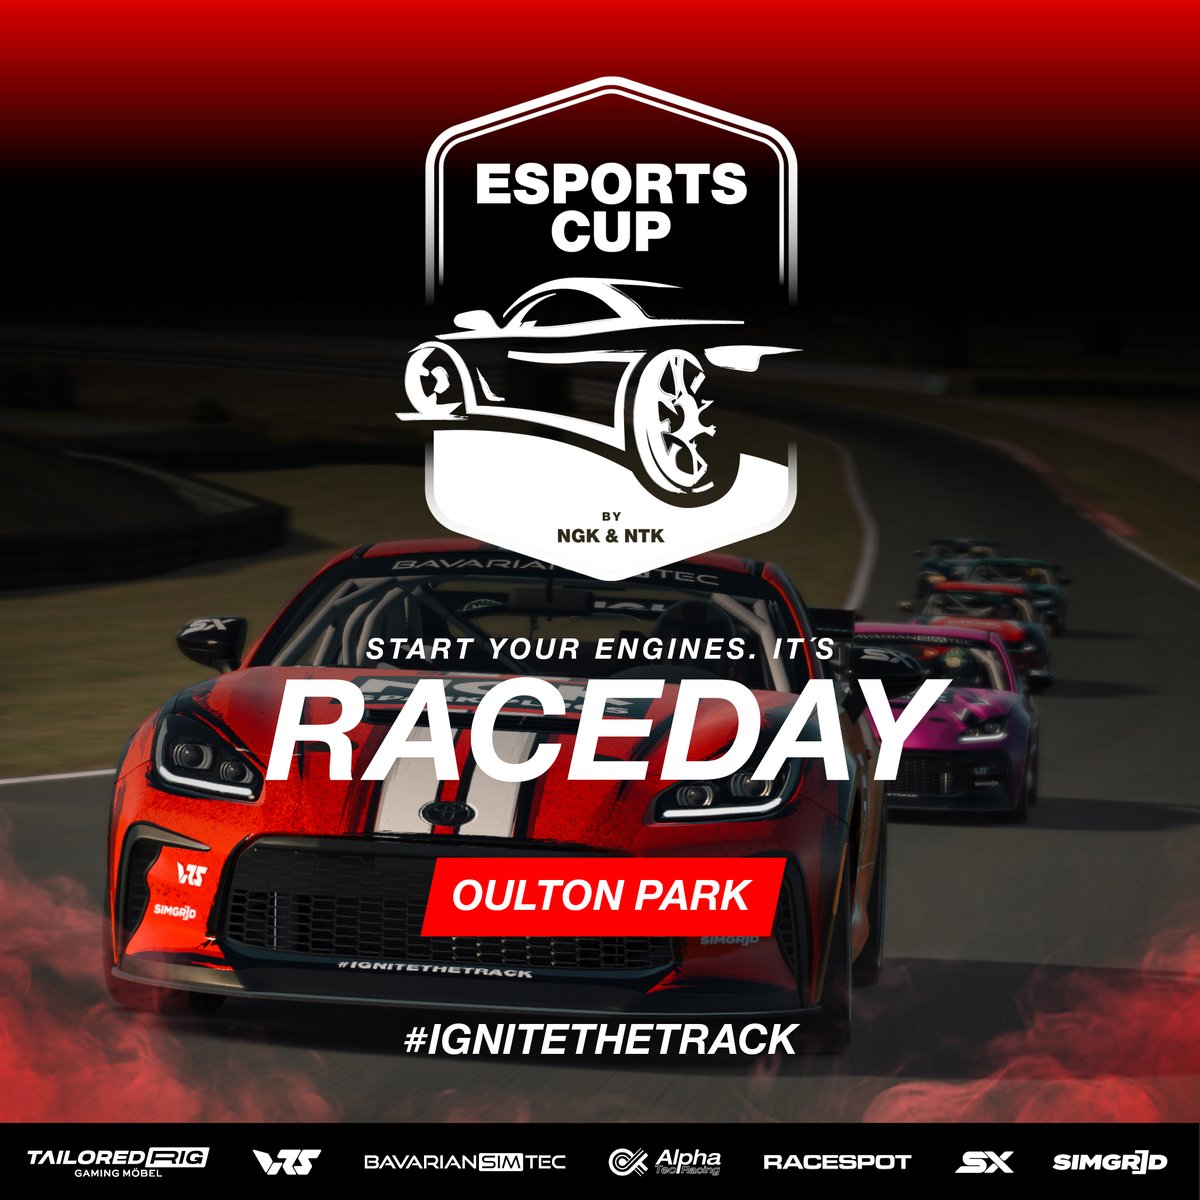 Join us LIVE at 19:00 CET for Round 6 of the NGK-NTK Esports Cup at Oulton Park, on @iRacing! Race Preview: t.ly/DYHo- Race Broadcast: youtu.be/OvL35b2VBGQ